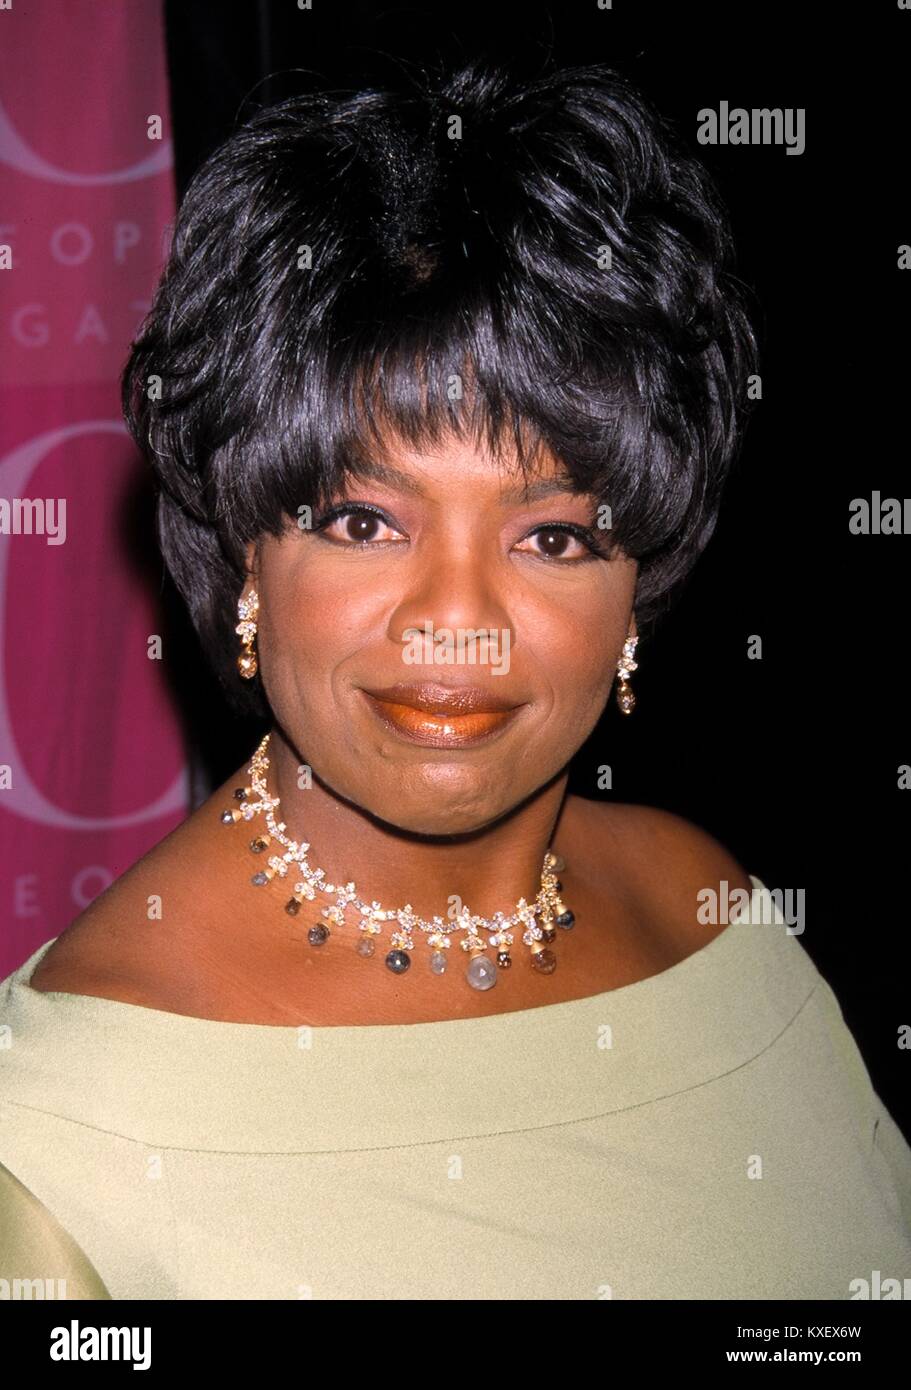 RTMcbride / MedaPunch  OPRAH WINFREY, GAYLE KING  AND HEARST MAGAZINES  4/17/2001 HOST THEIR 1st ANNIVERSARY OF  O  MAGAZINE.  CIPRIANI RESTAURANT IN NEW YORK CITY. CREDIT ALL USES Stock Photo